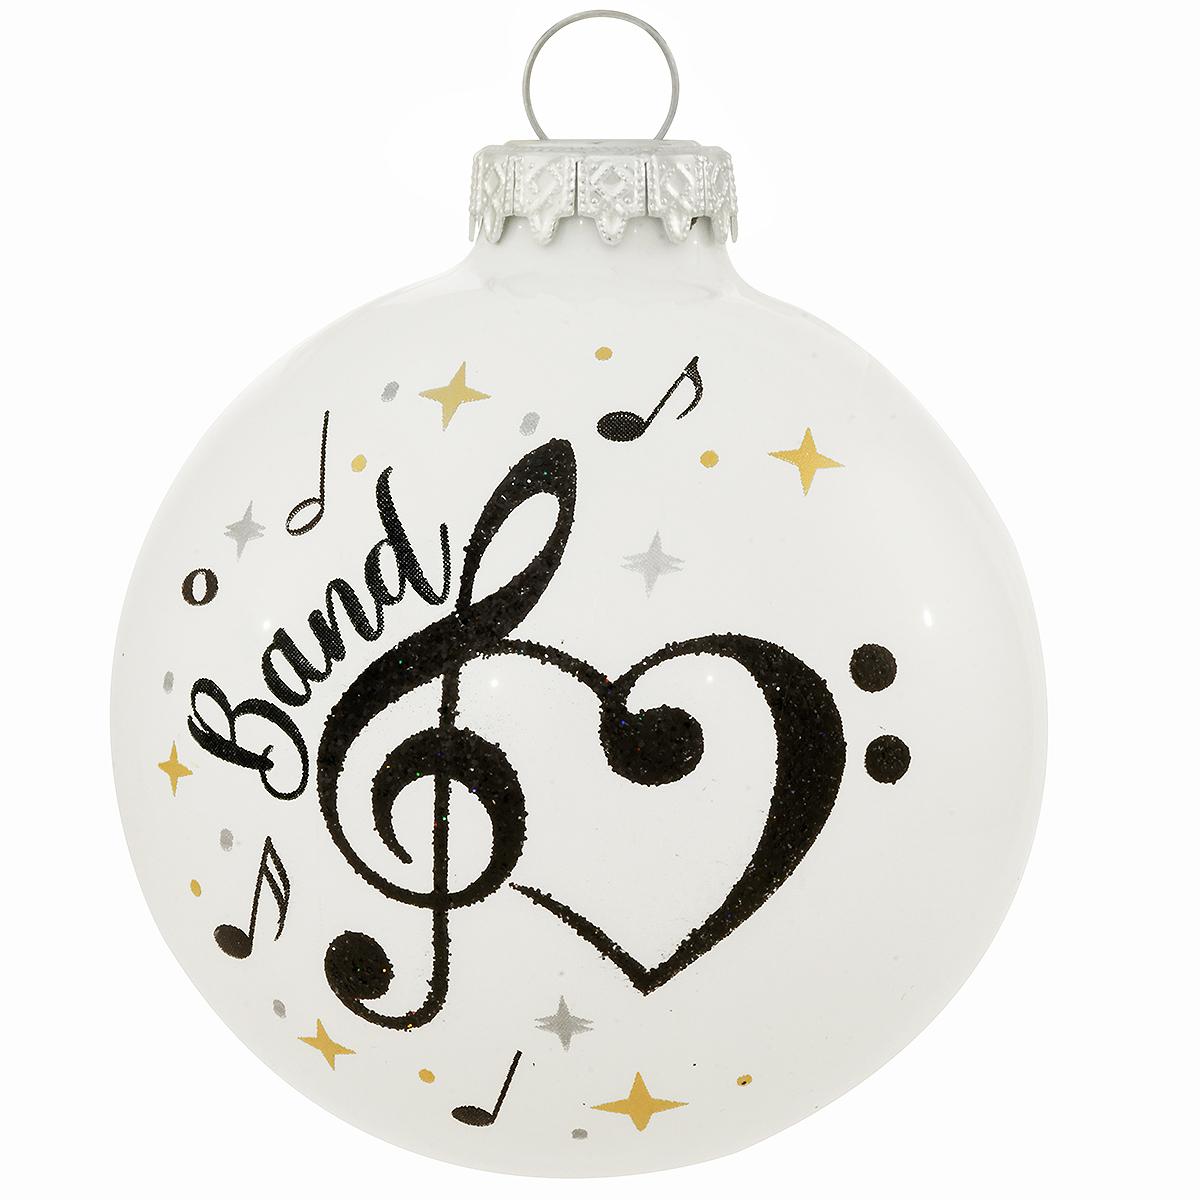 Band With Heart Glass Ornament